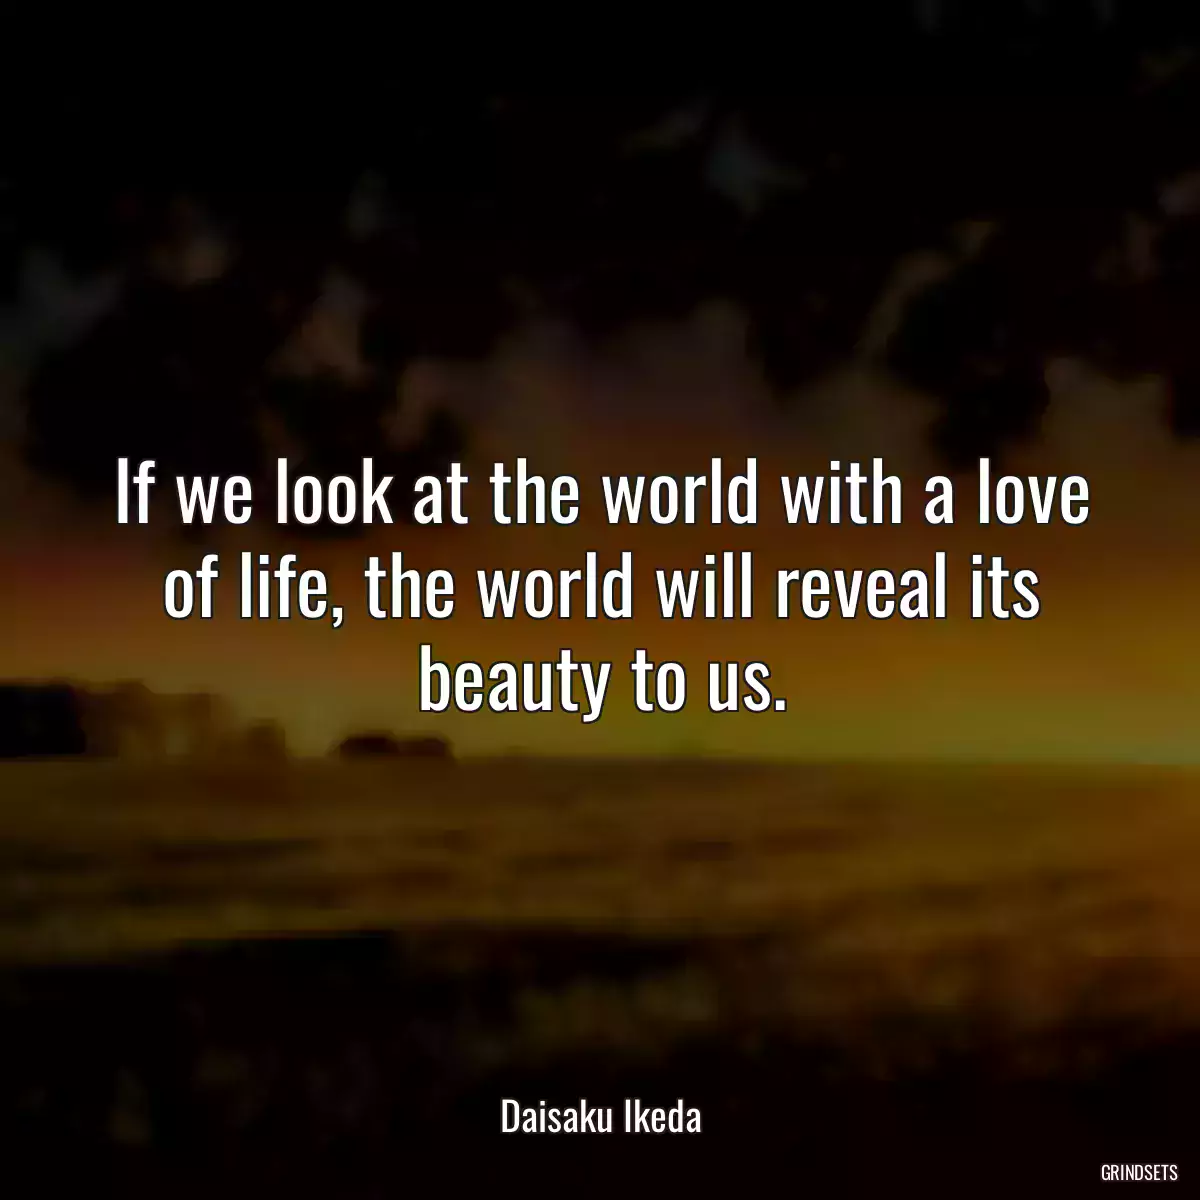 If we look at the world with a love of life, the world will reveal its beauty to us.